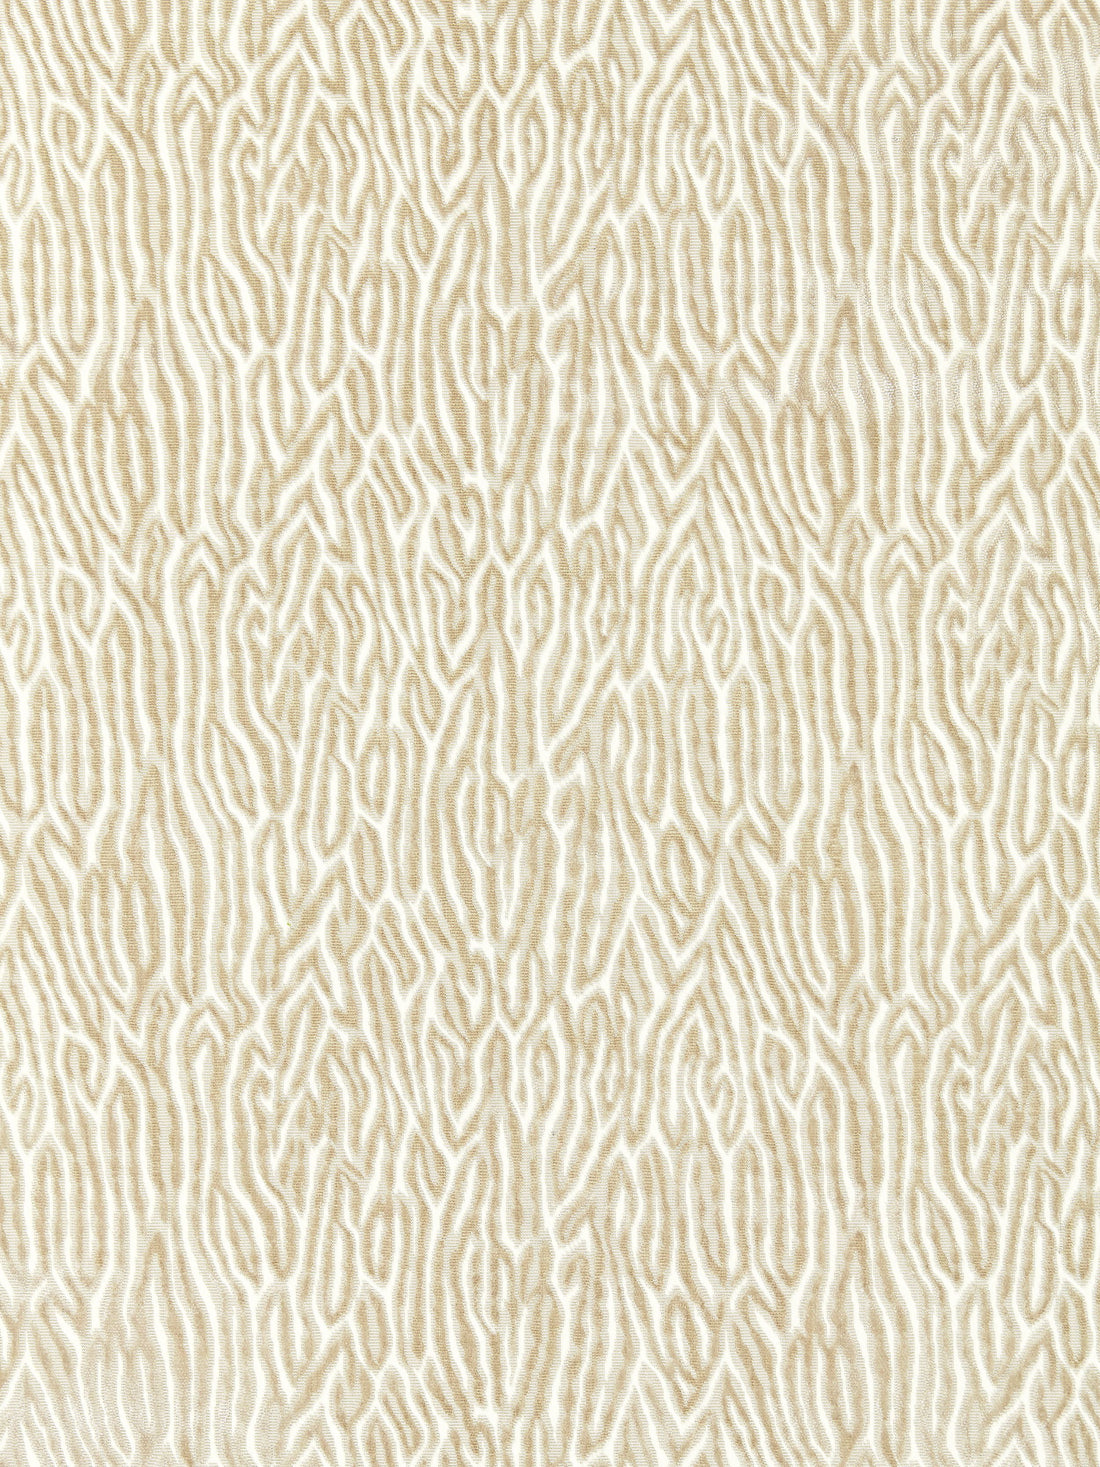 Faux Bois Velvet fabric in fog color - pattern number SC 000127076 - by Scalamandre in the Scalamandre Fabrics Book 1 collection